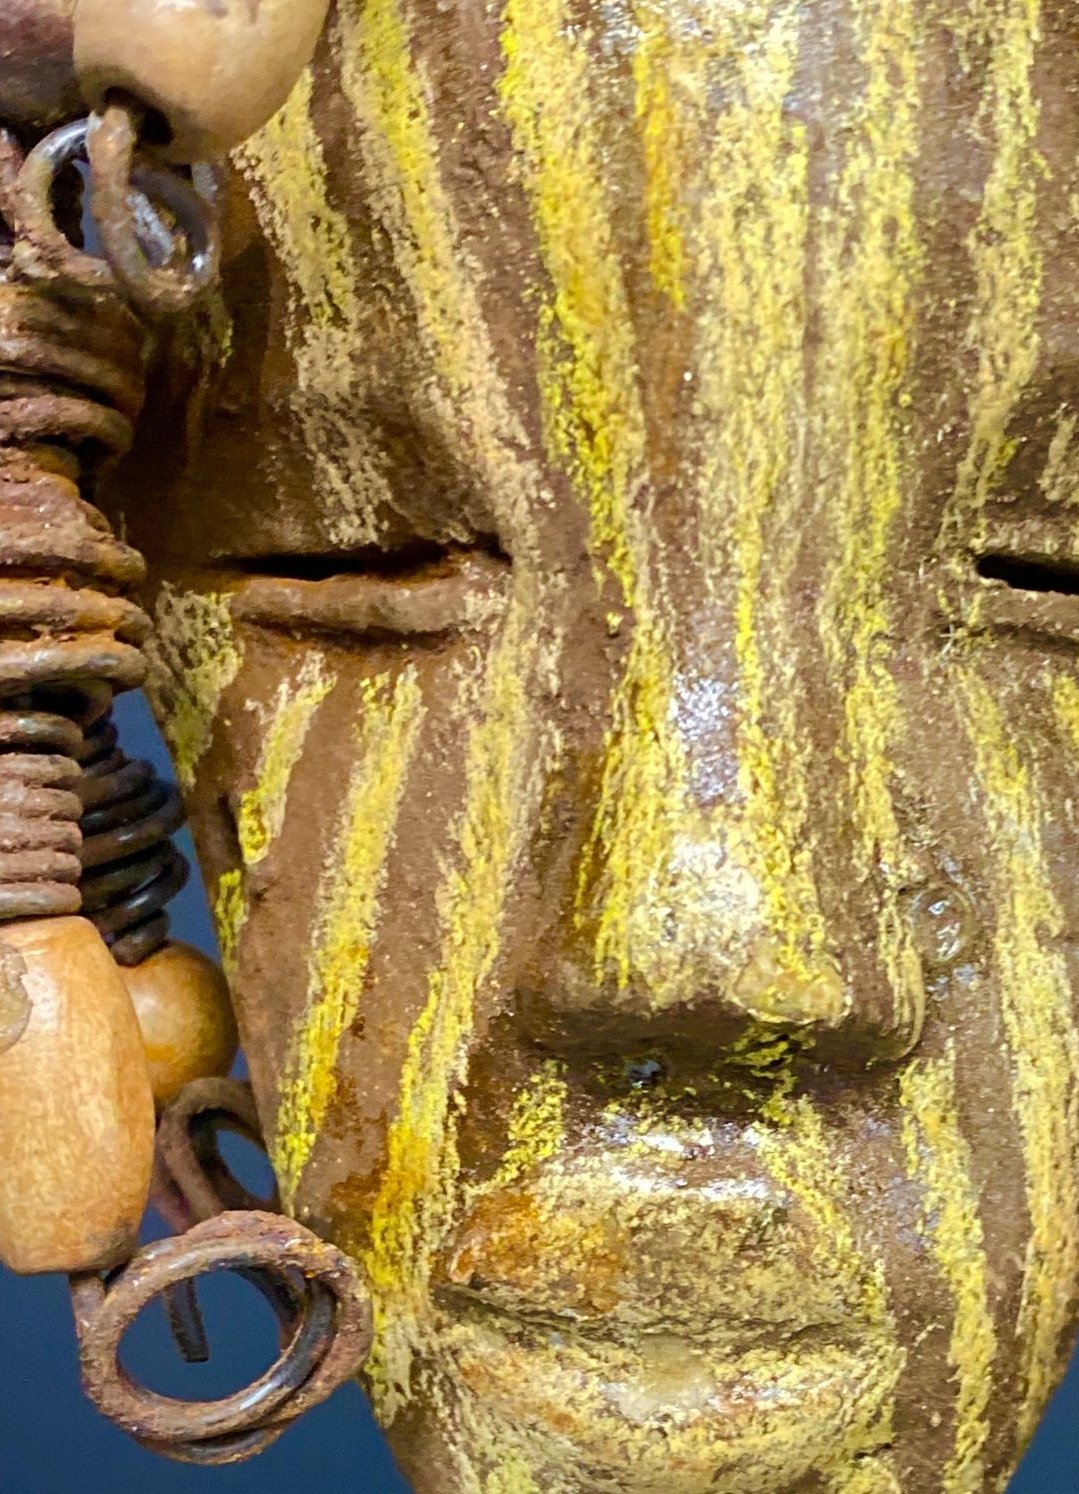 I started making art soon after seeing authentic African artwork at the Smithsonian Museum of African Art. I was in total awe.  Kaba was inspired by my visit there.   Kaba has a two tone  striped complexion of earthy gold and brown. He is 5" x 7” and weighs 1 lbs. Kaba has over 10 wooden beads. He has over 10 feet of coiled 16 gauge wire hair. If for some reason Kaba does not fit in your home, send him back for a full refund!